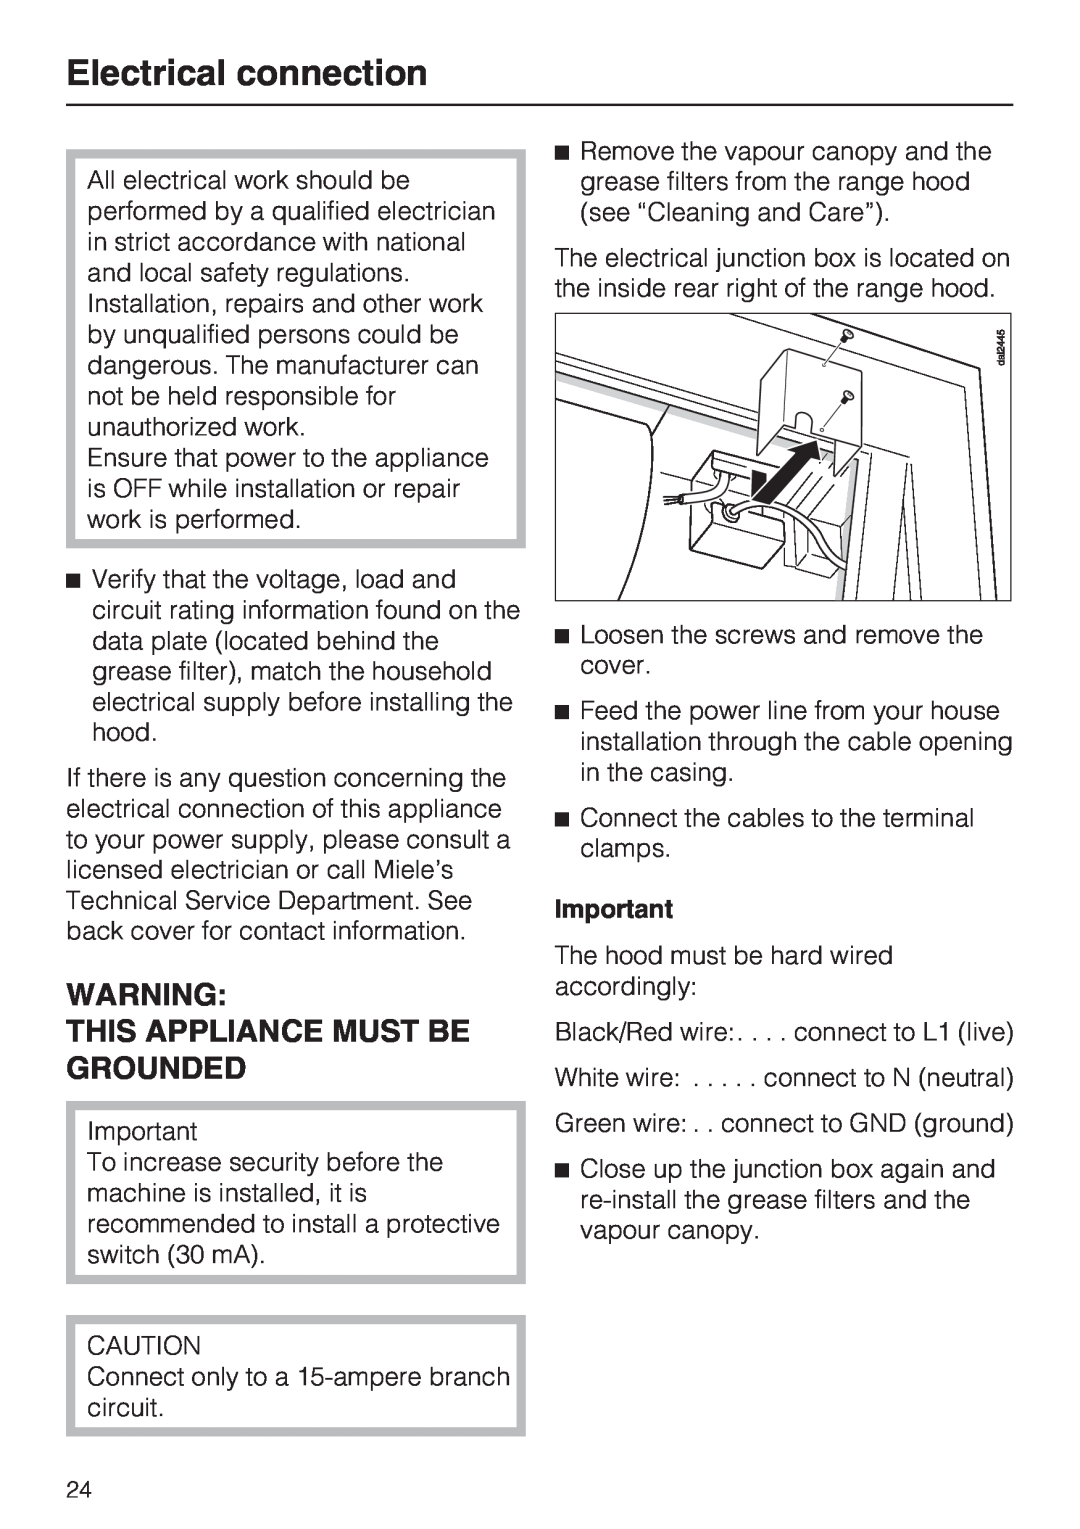 Miele DA 186, DA 188, DA 189 installation instructions Electrical connection, This Appliance Must Be Grounded 